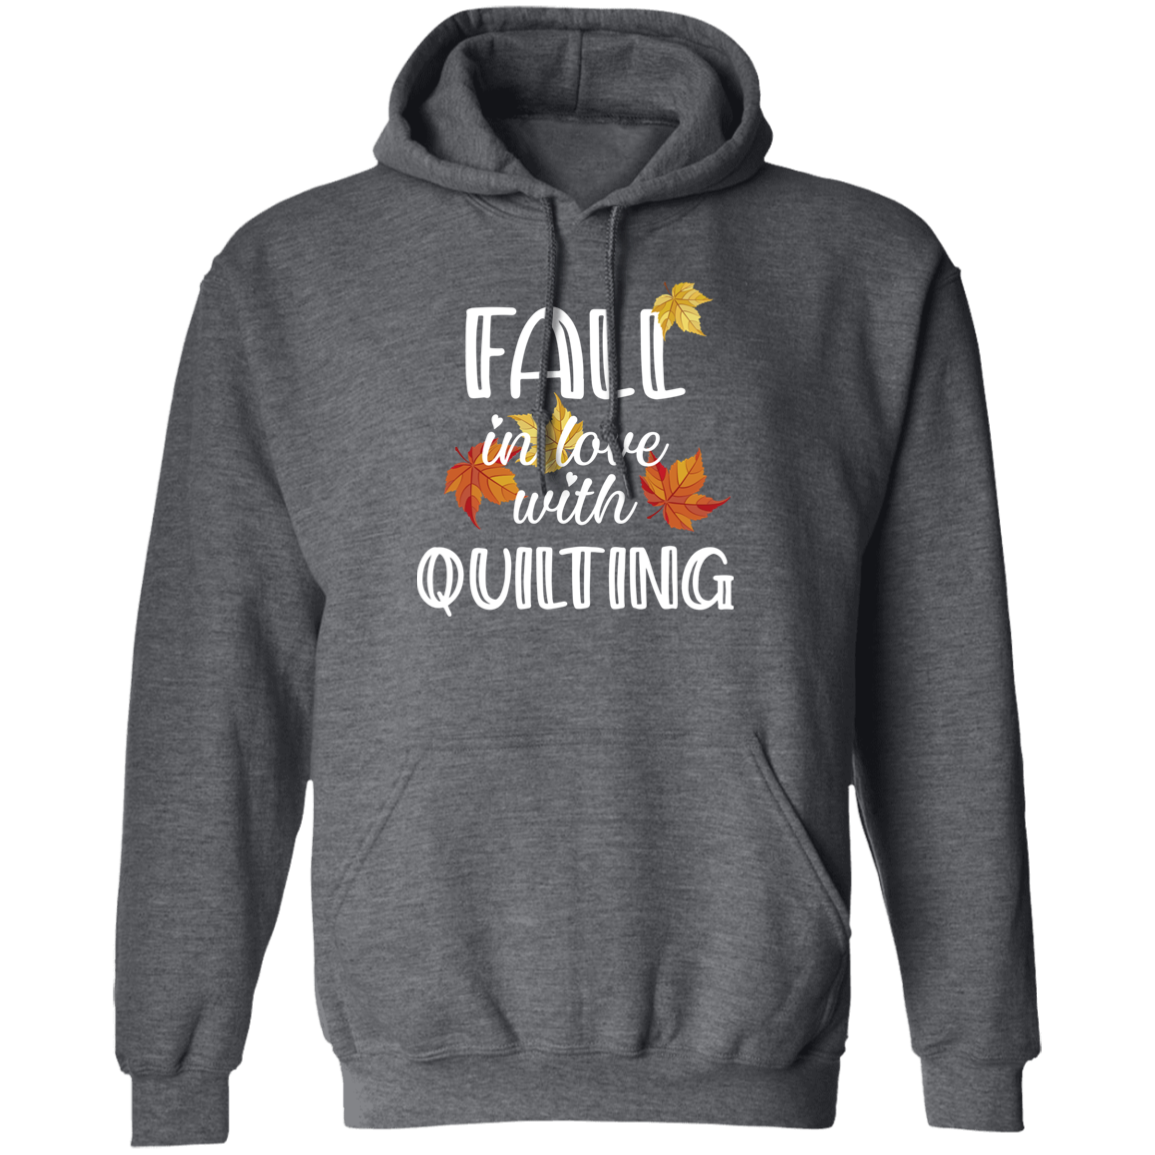 Fall in Love with Quilting Pullover Hoodie